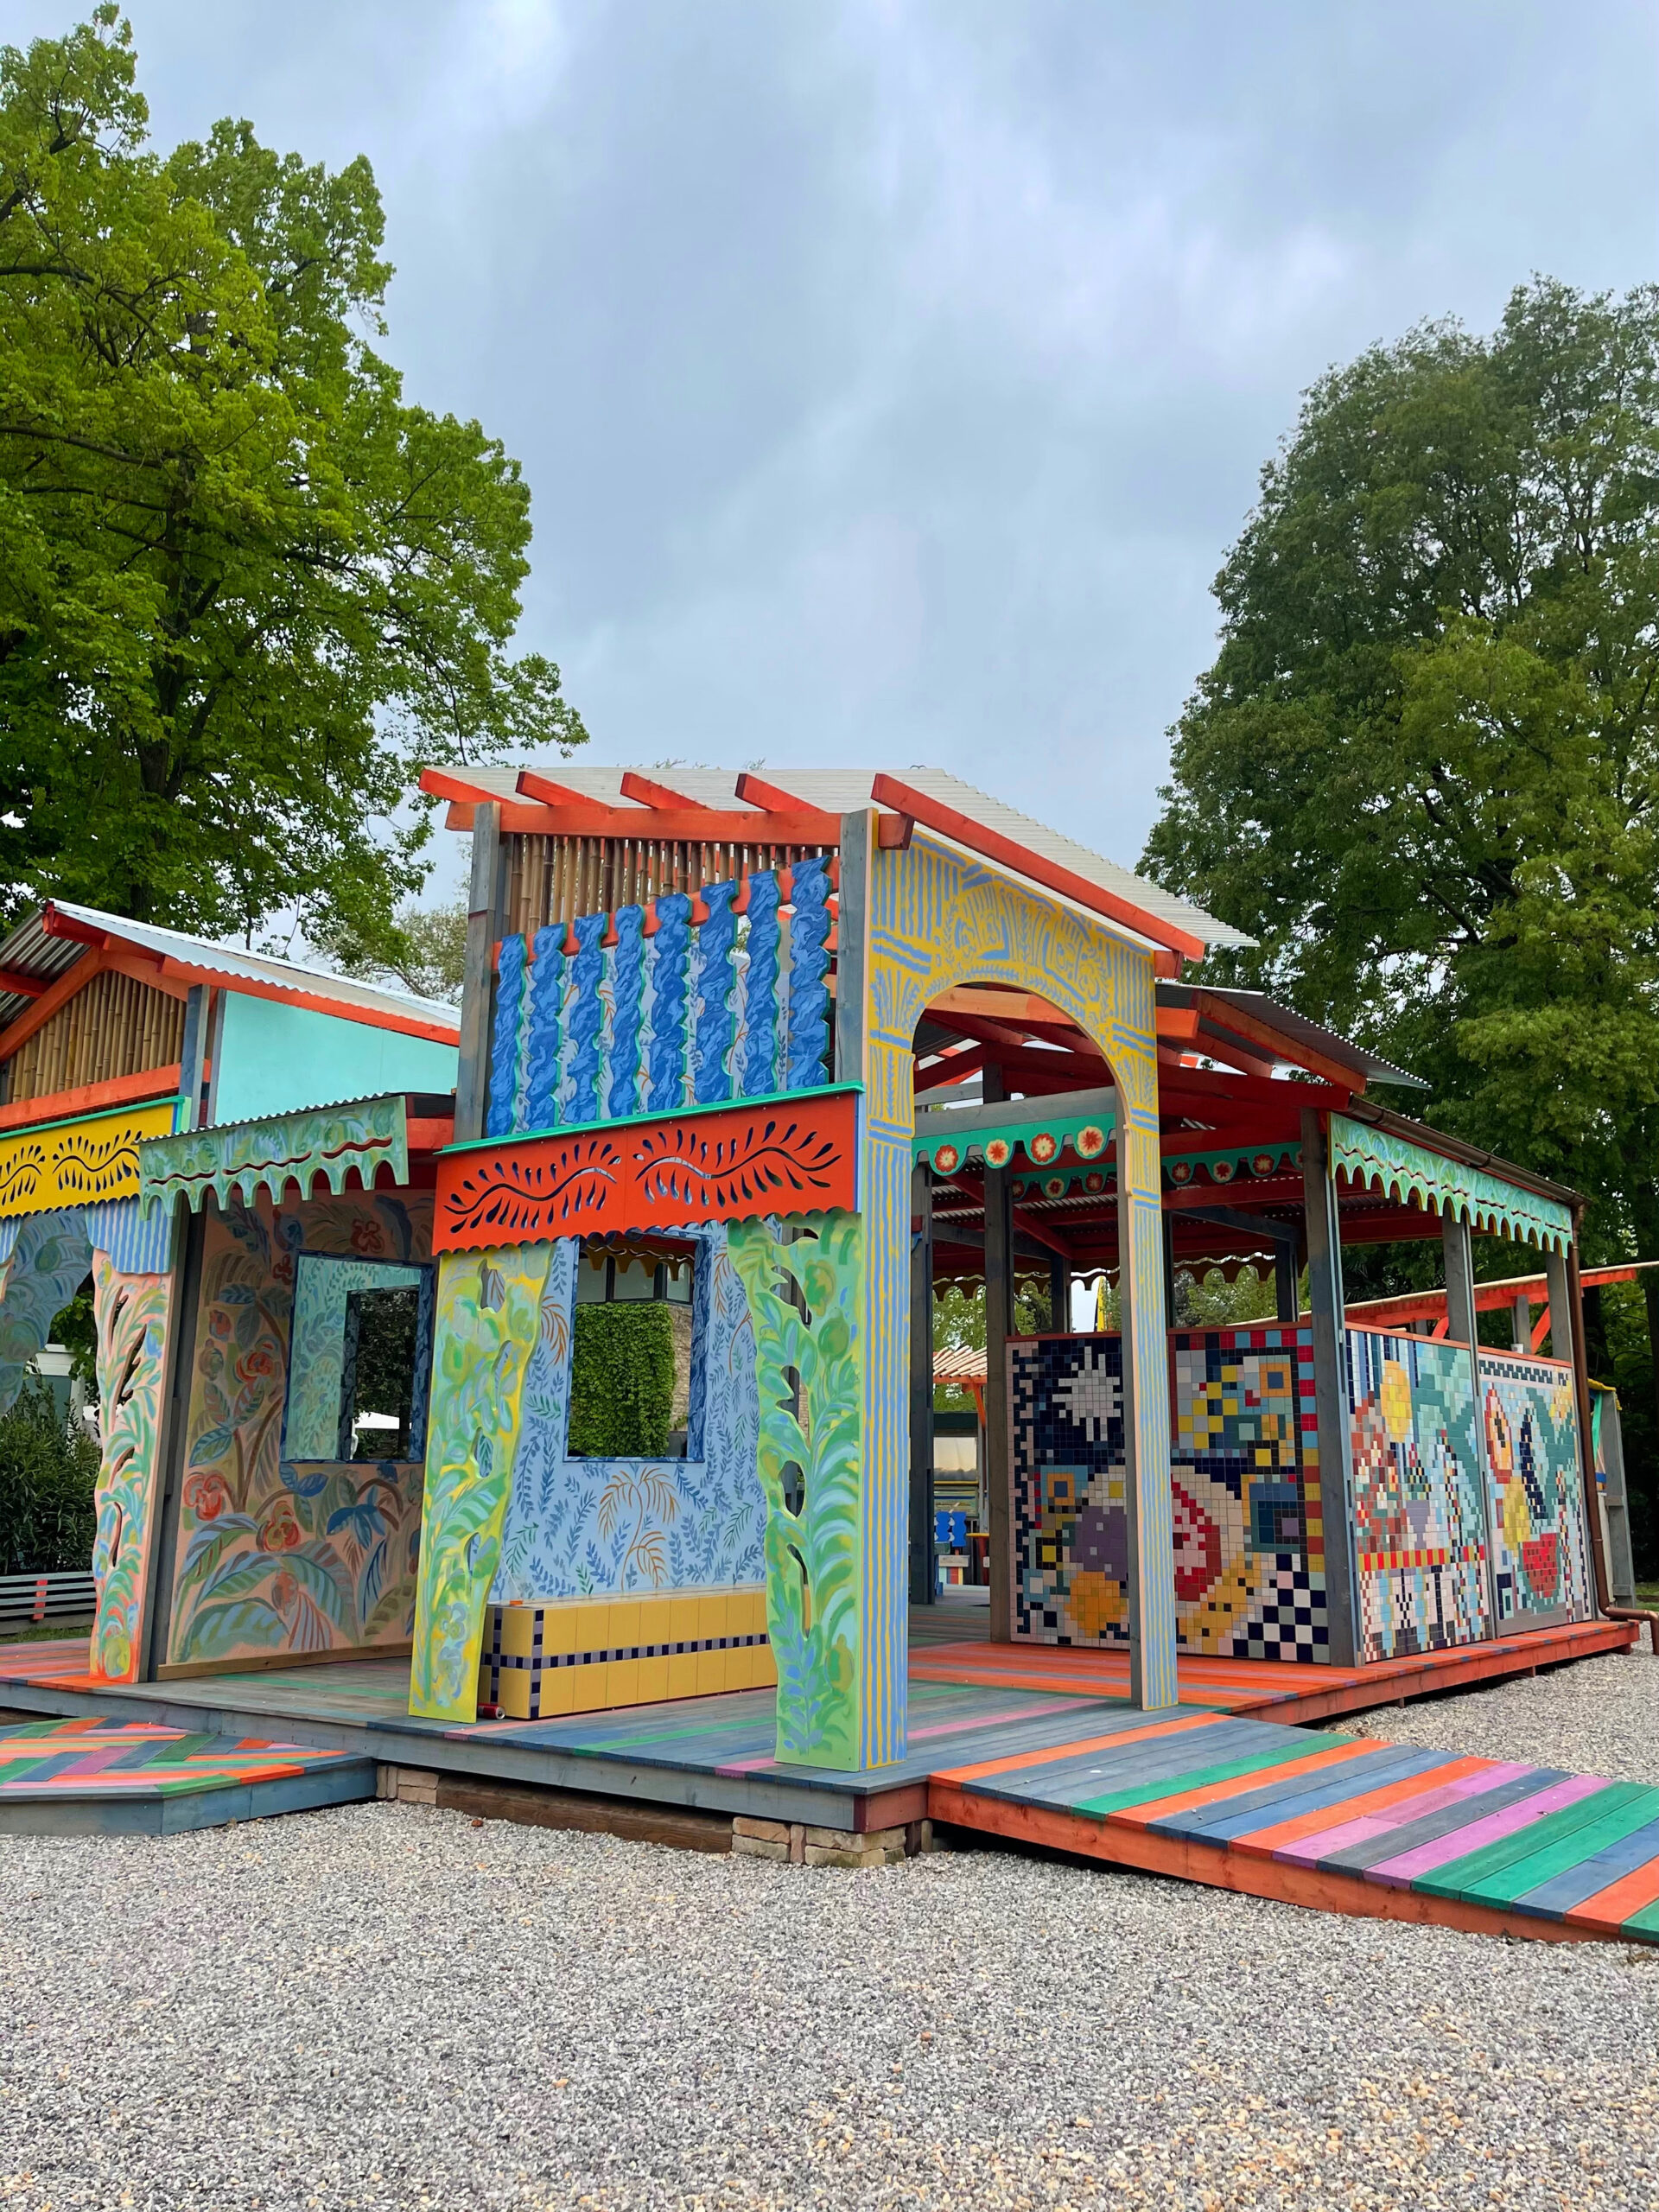 a large colourful outdoor pavilion with seating areas, painted and mosaic